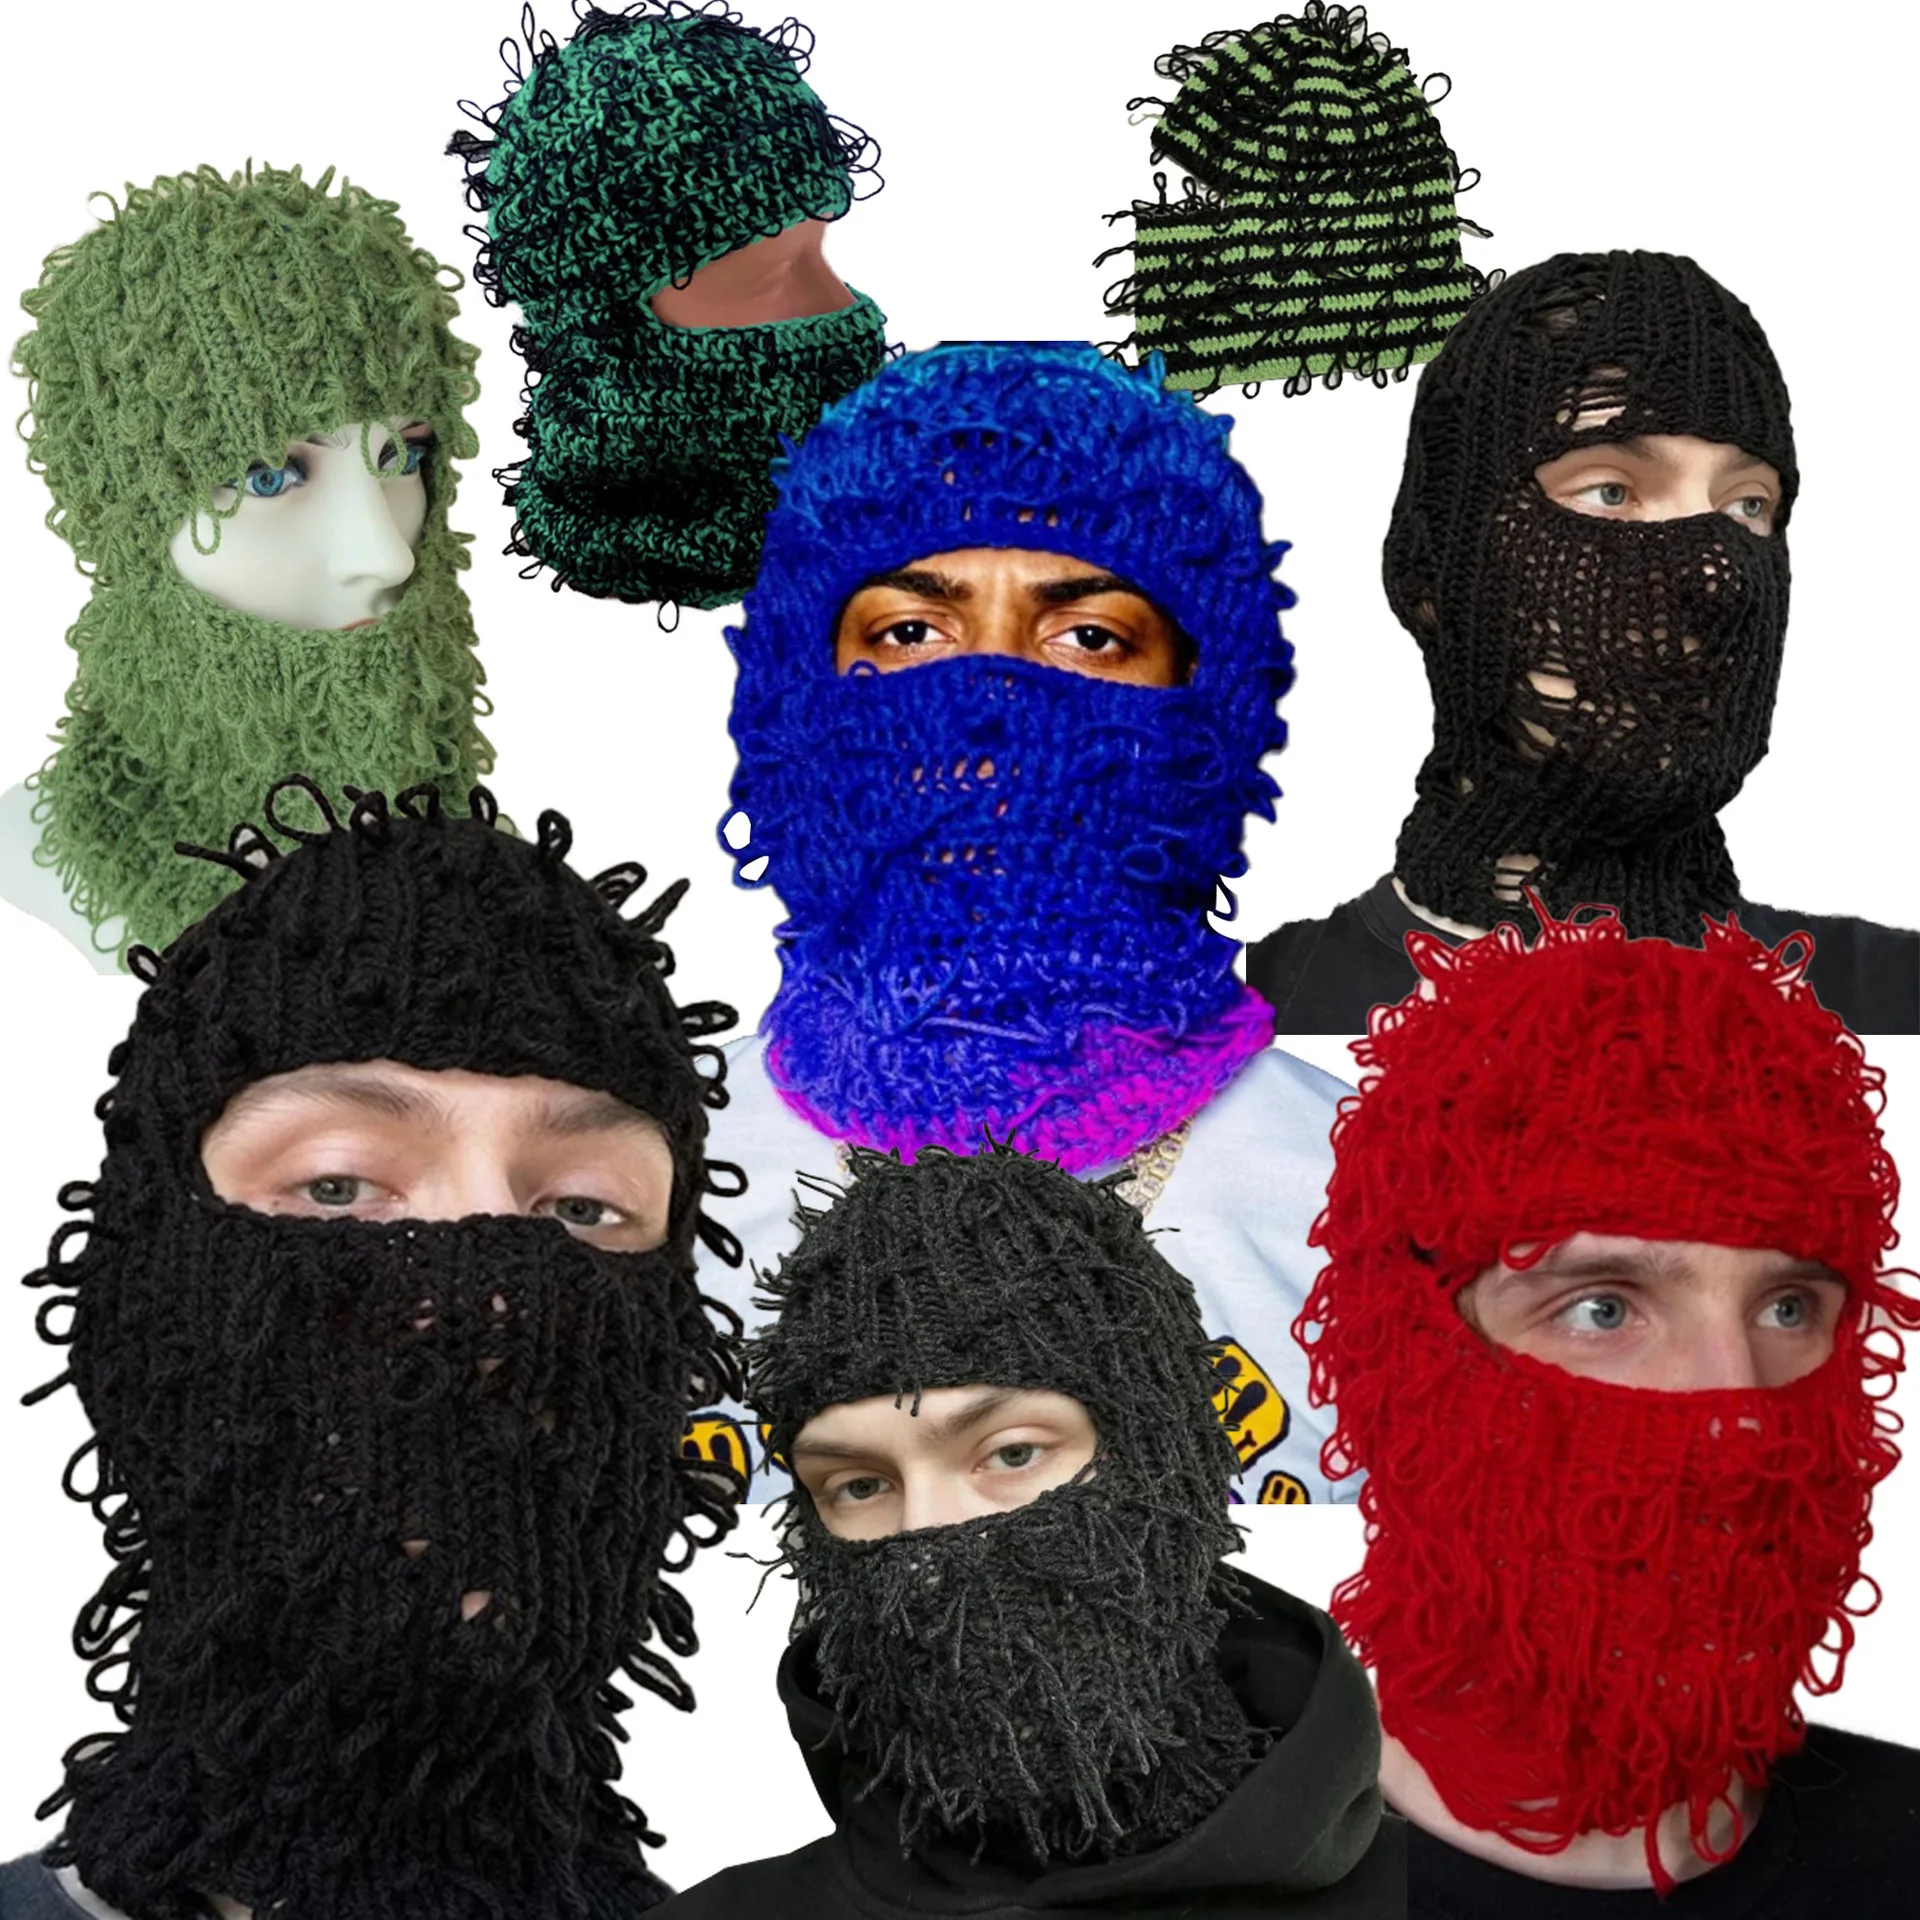 

Balaclava Ski Hat Hand-knitted Fabric Role Play Headgear Men's and Women's Camouflage Winter Warm Hats